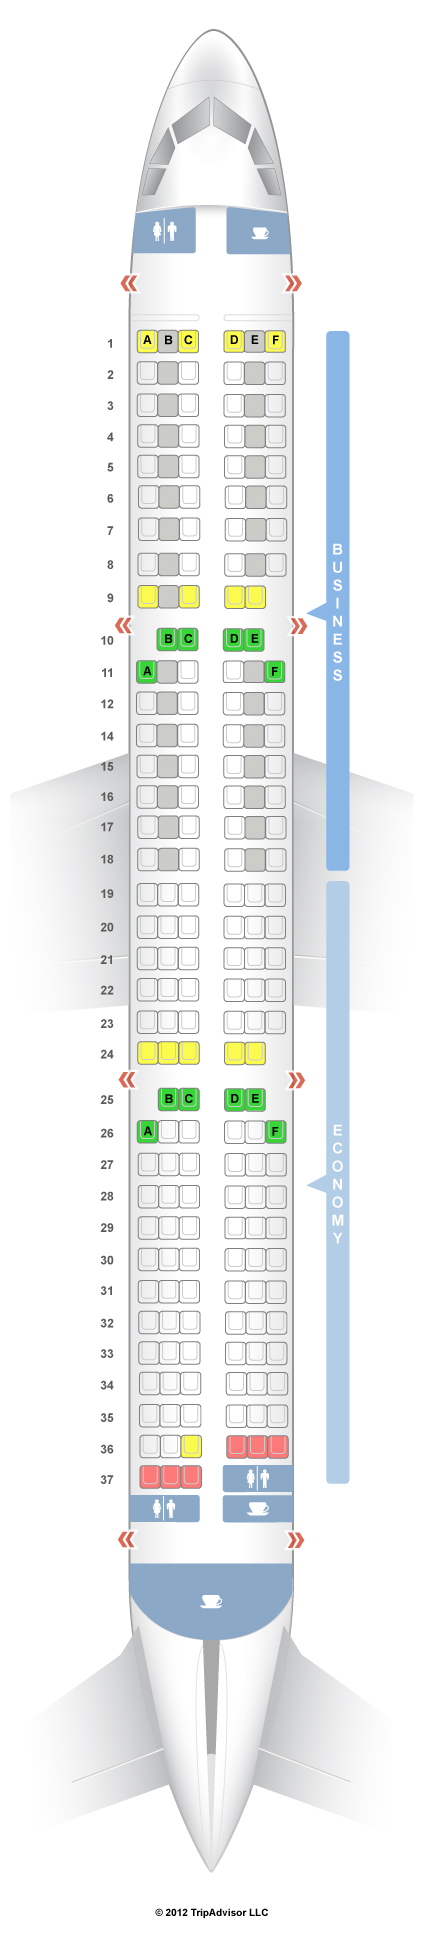 Delta 121 Seating Chart